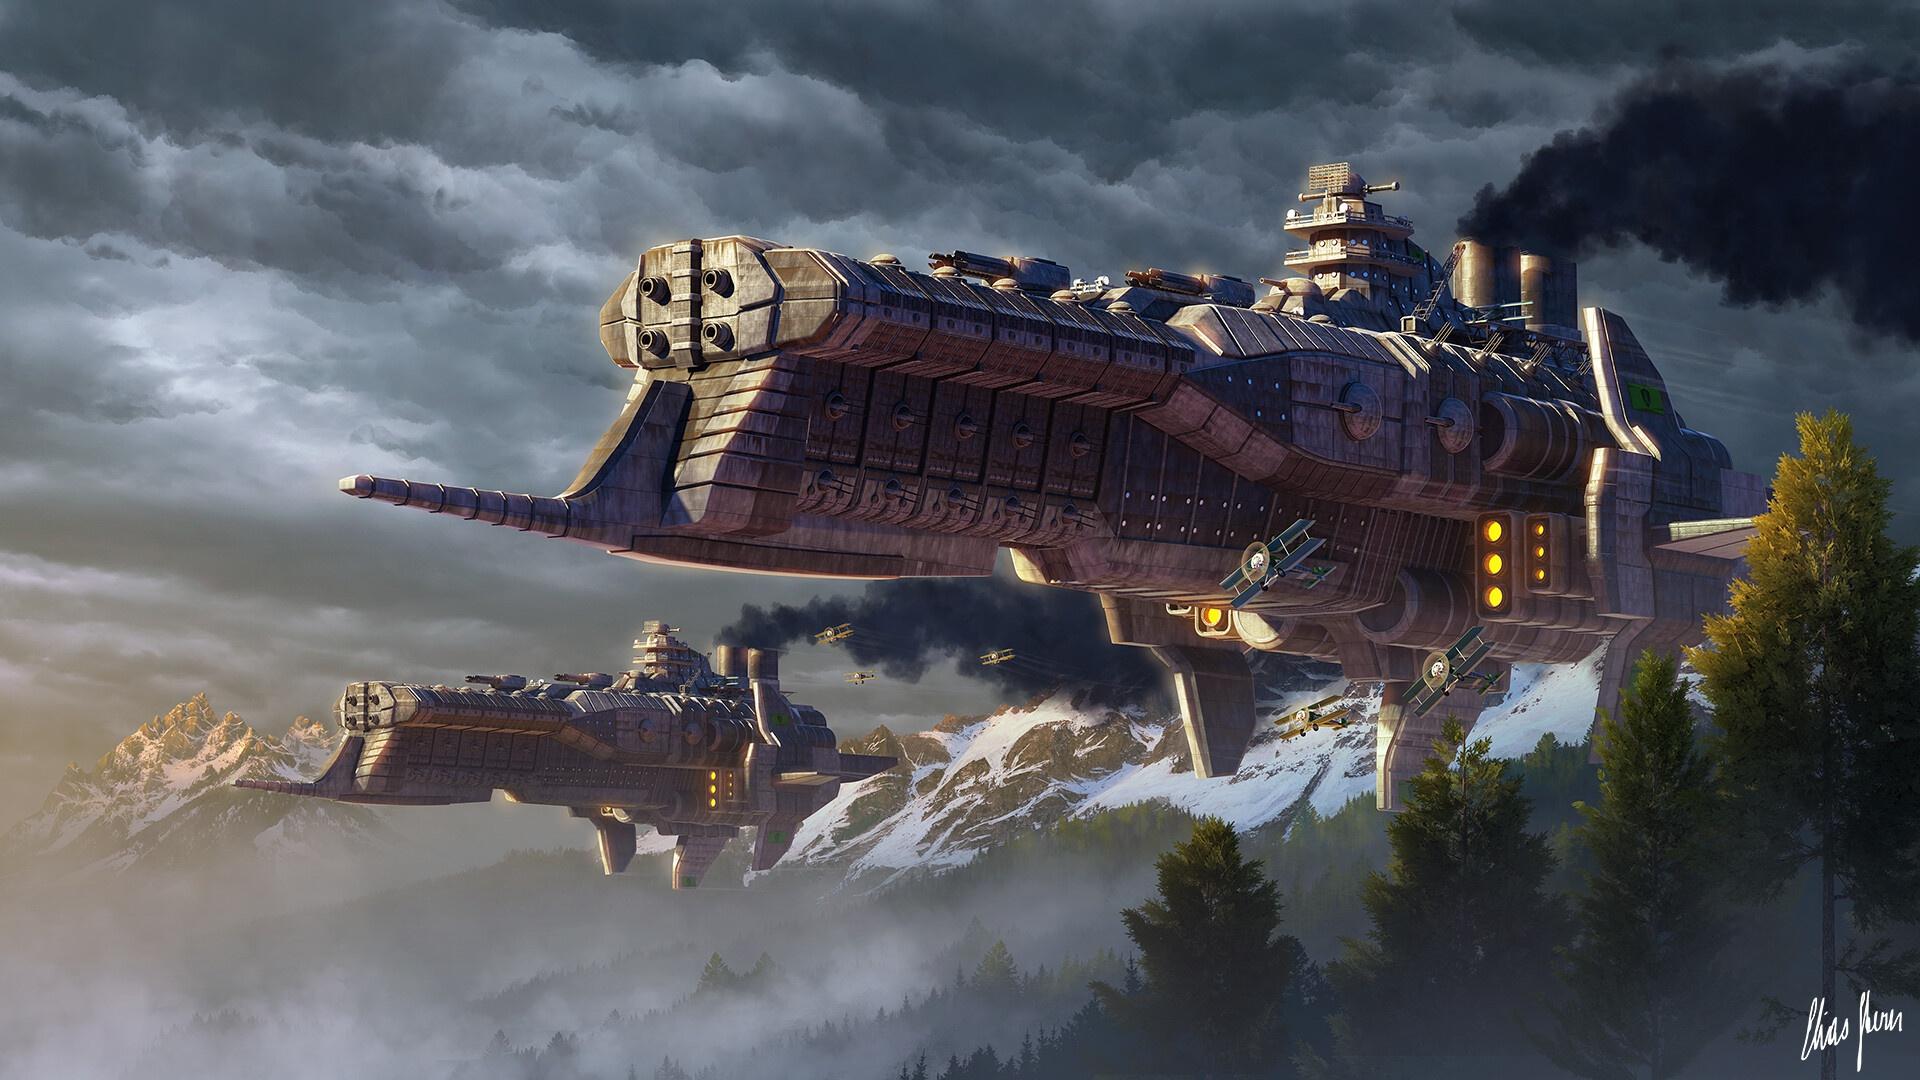 1920 x 1080 · jpeg - Dieselpunk airships on the move HD Wallpaper | Background Image ...